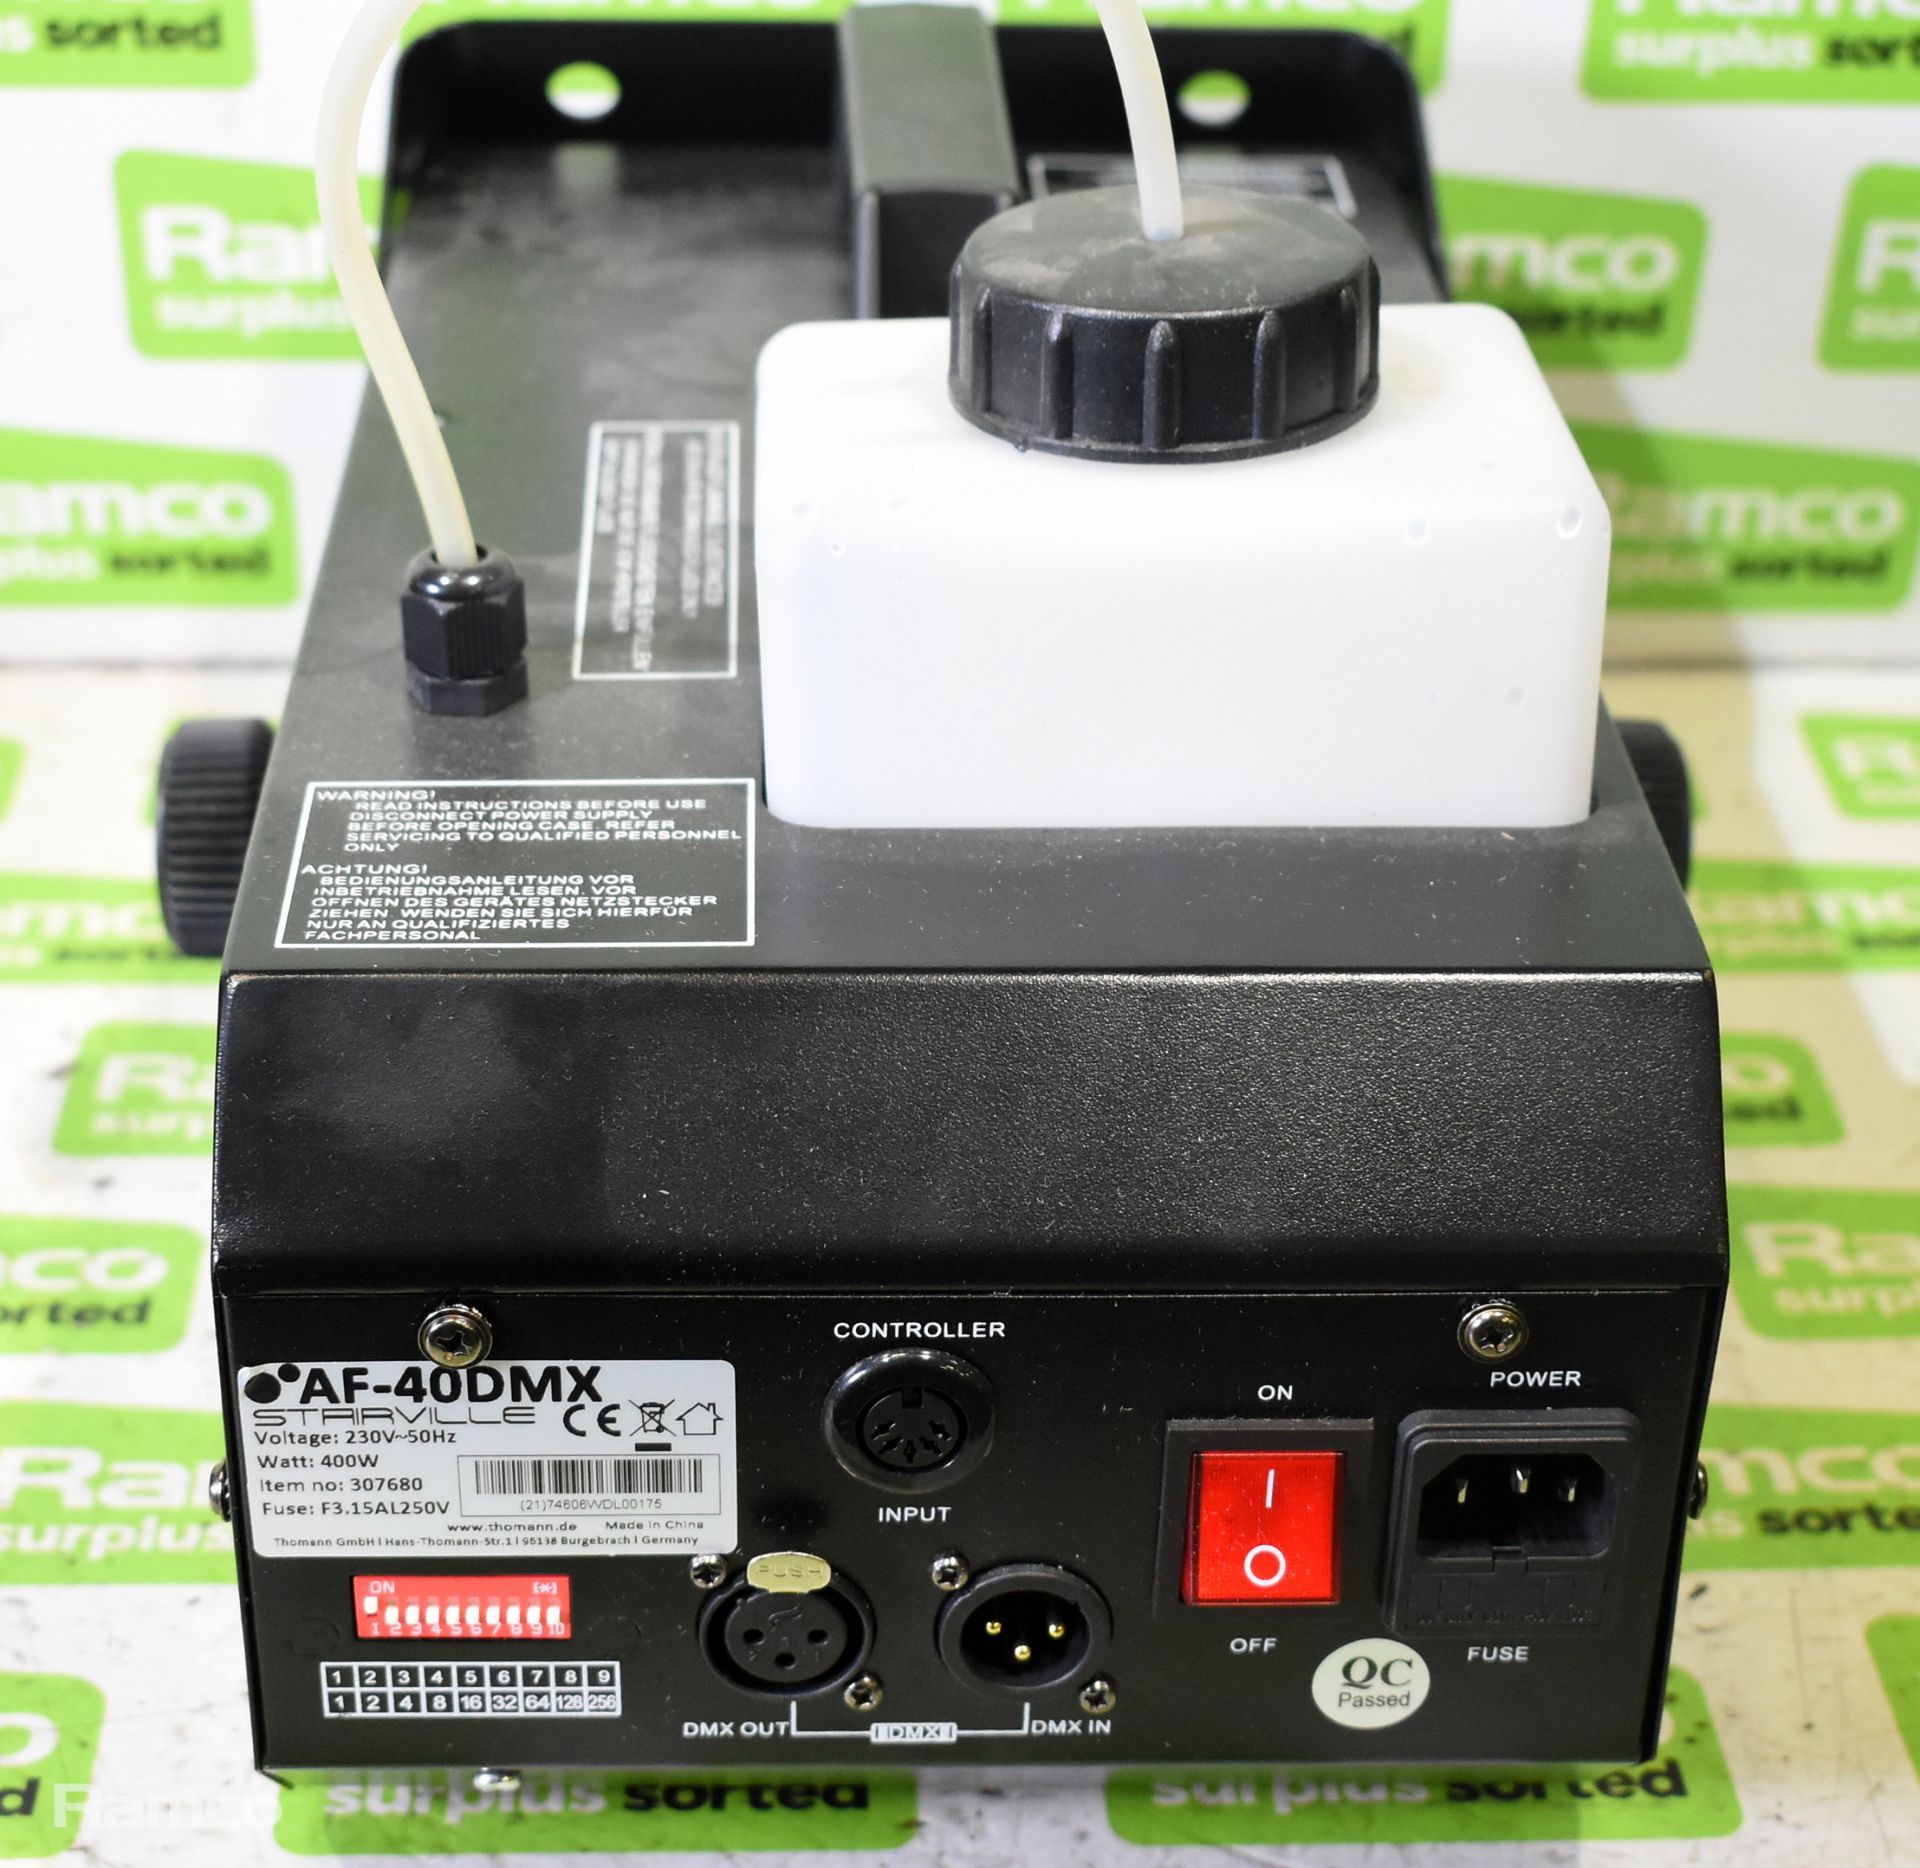 Stairville AF-40 DMX mini fog machine with remote - Image 2 of 7